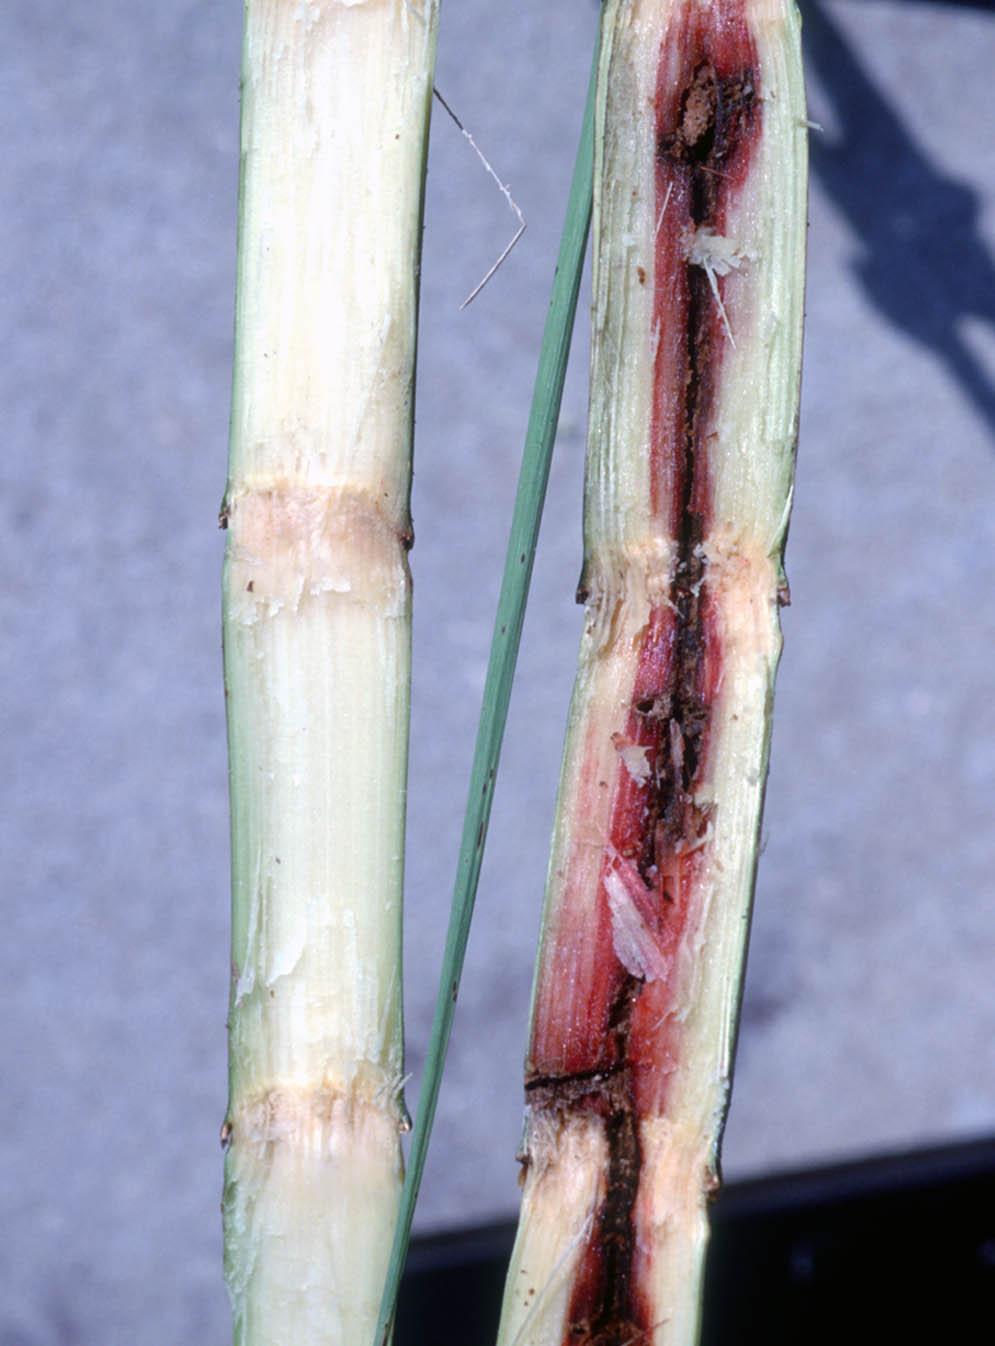 Sugarcane Borer in Florida 3 as control measures, if necessary, can then be applied before any damage to stalks occurs.